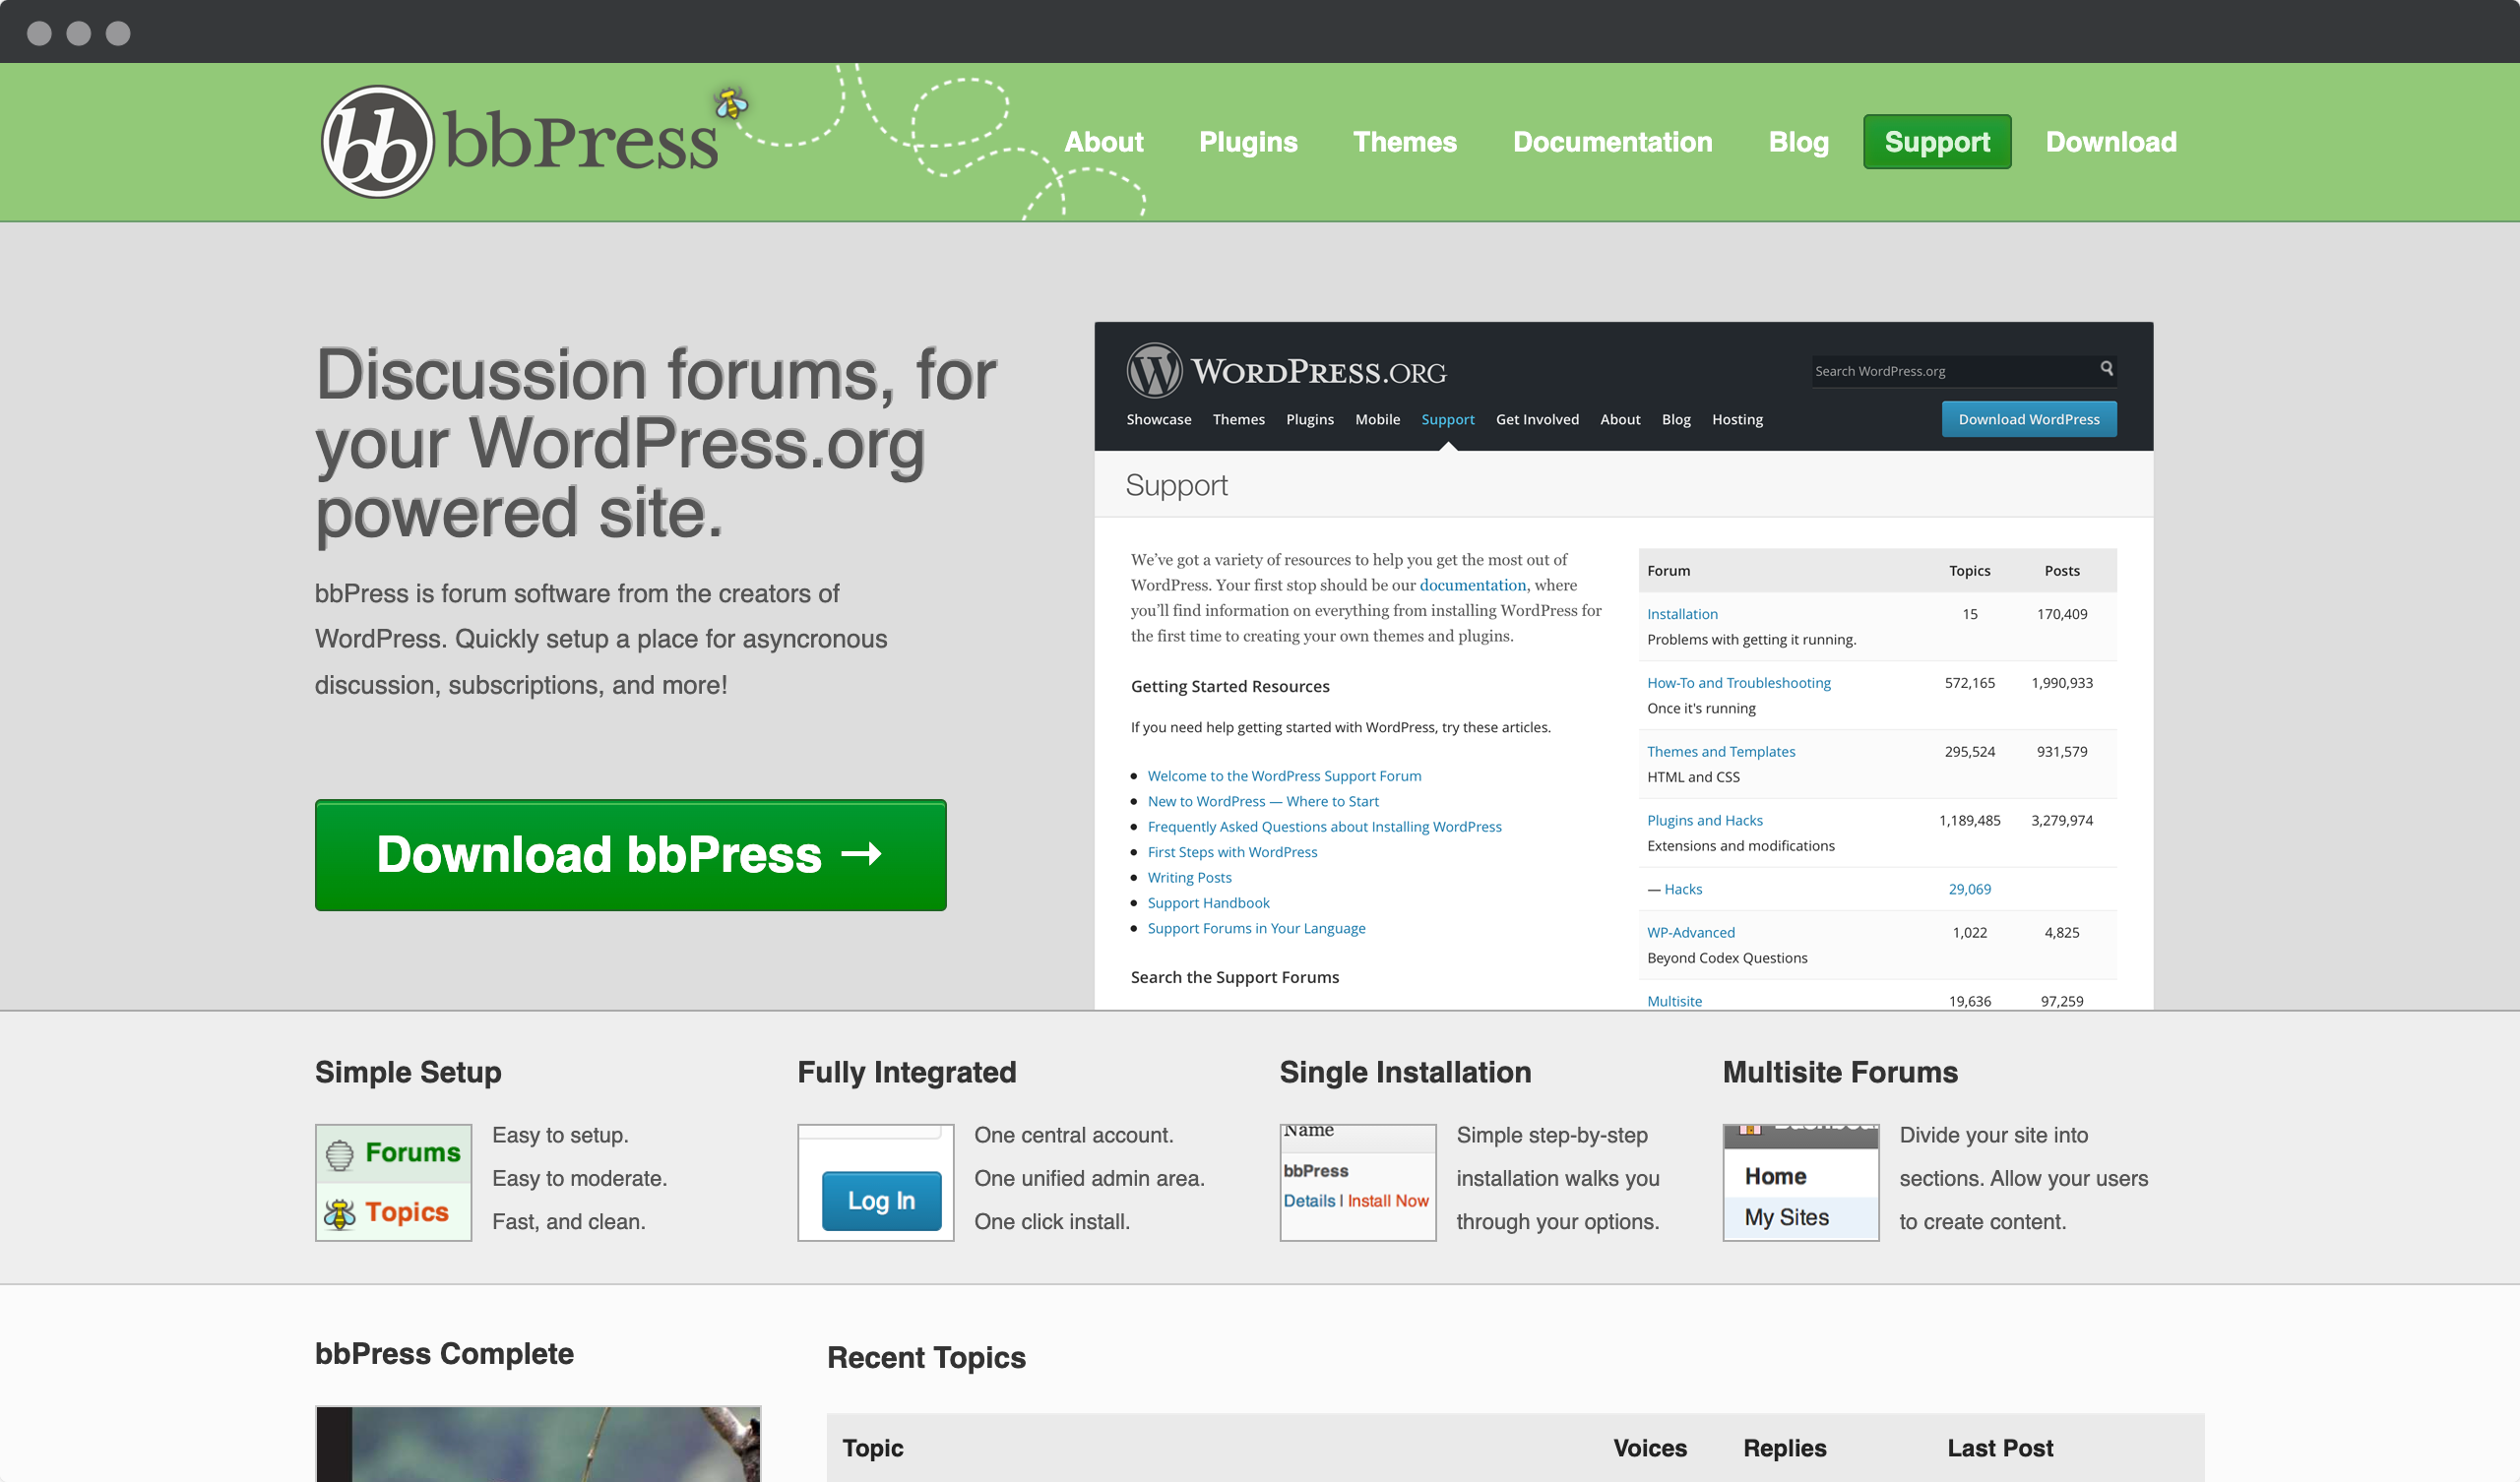 Screenshot of the bbPress website - a plugin for creating discussion forums for WordPress websites.